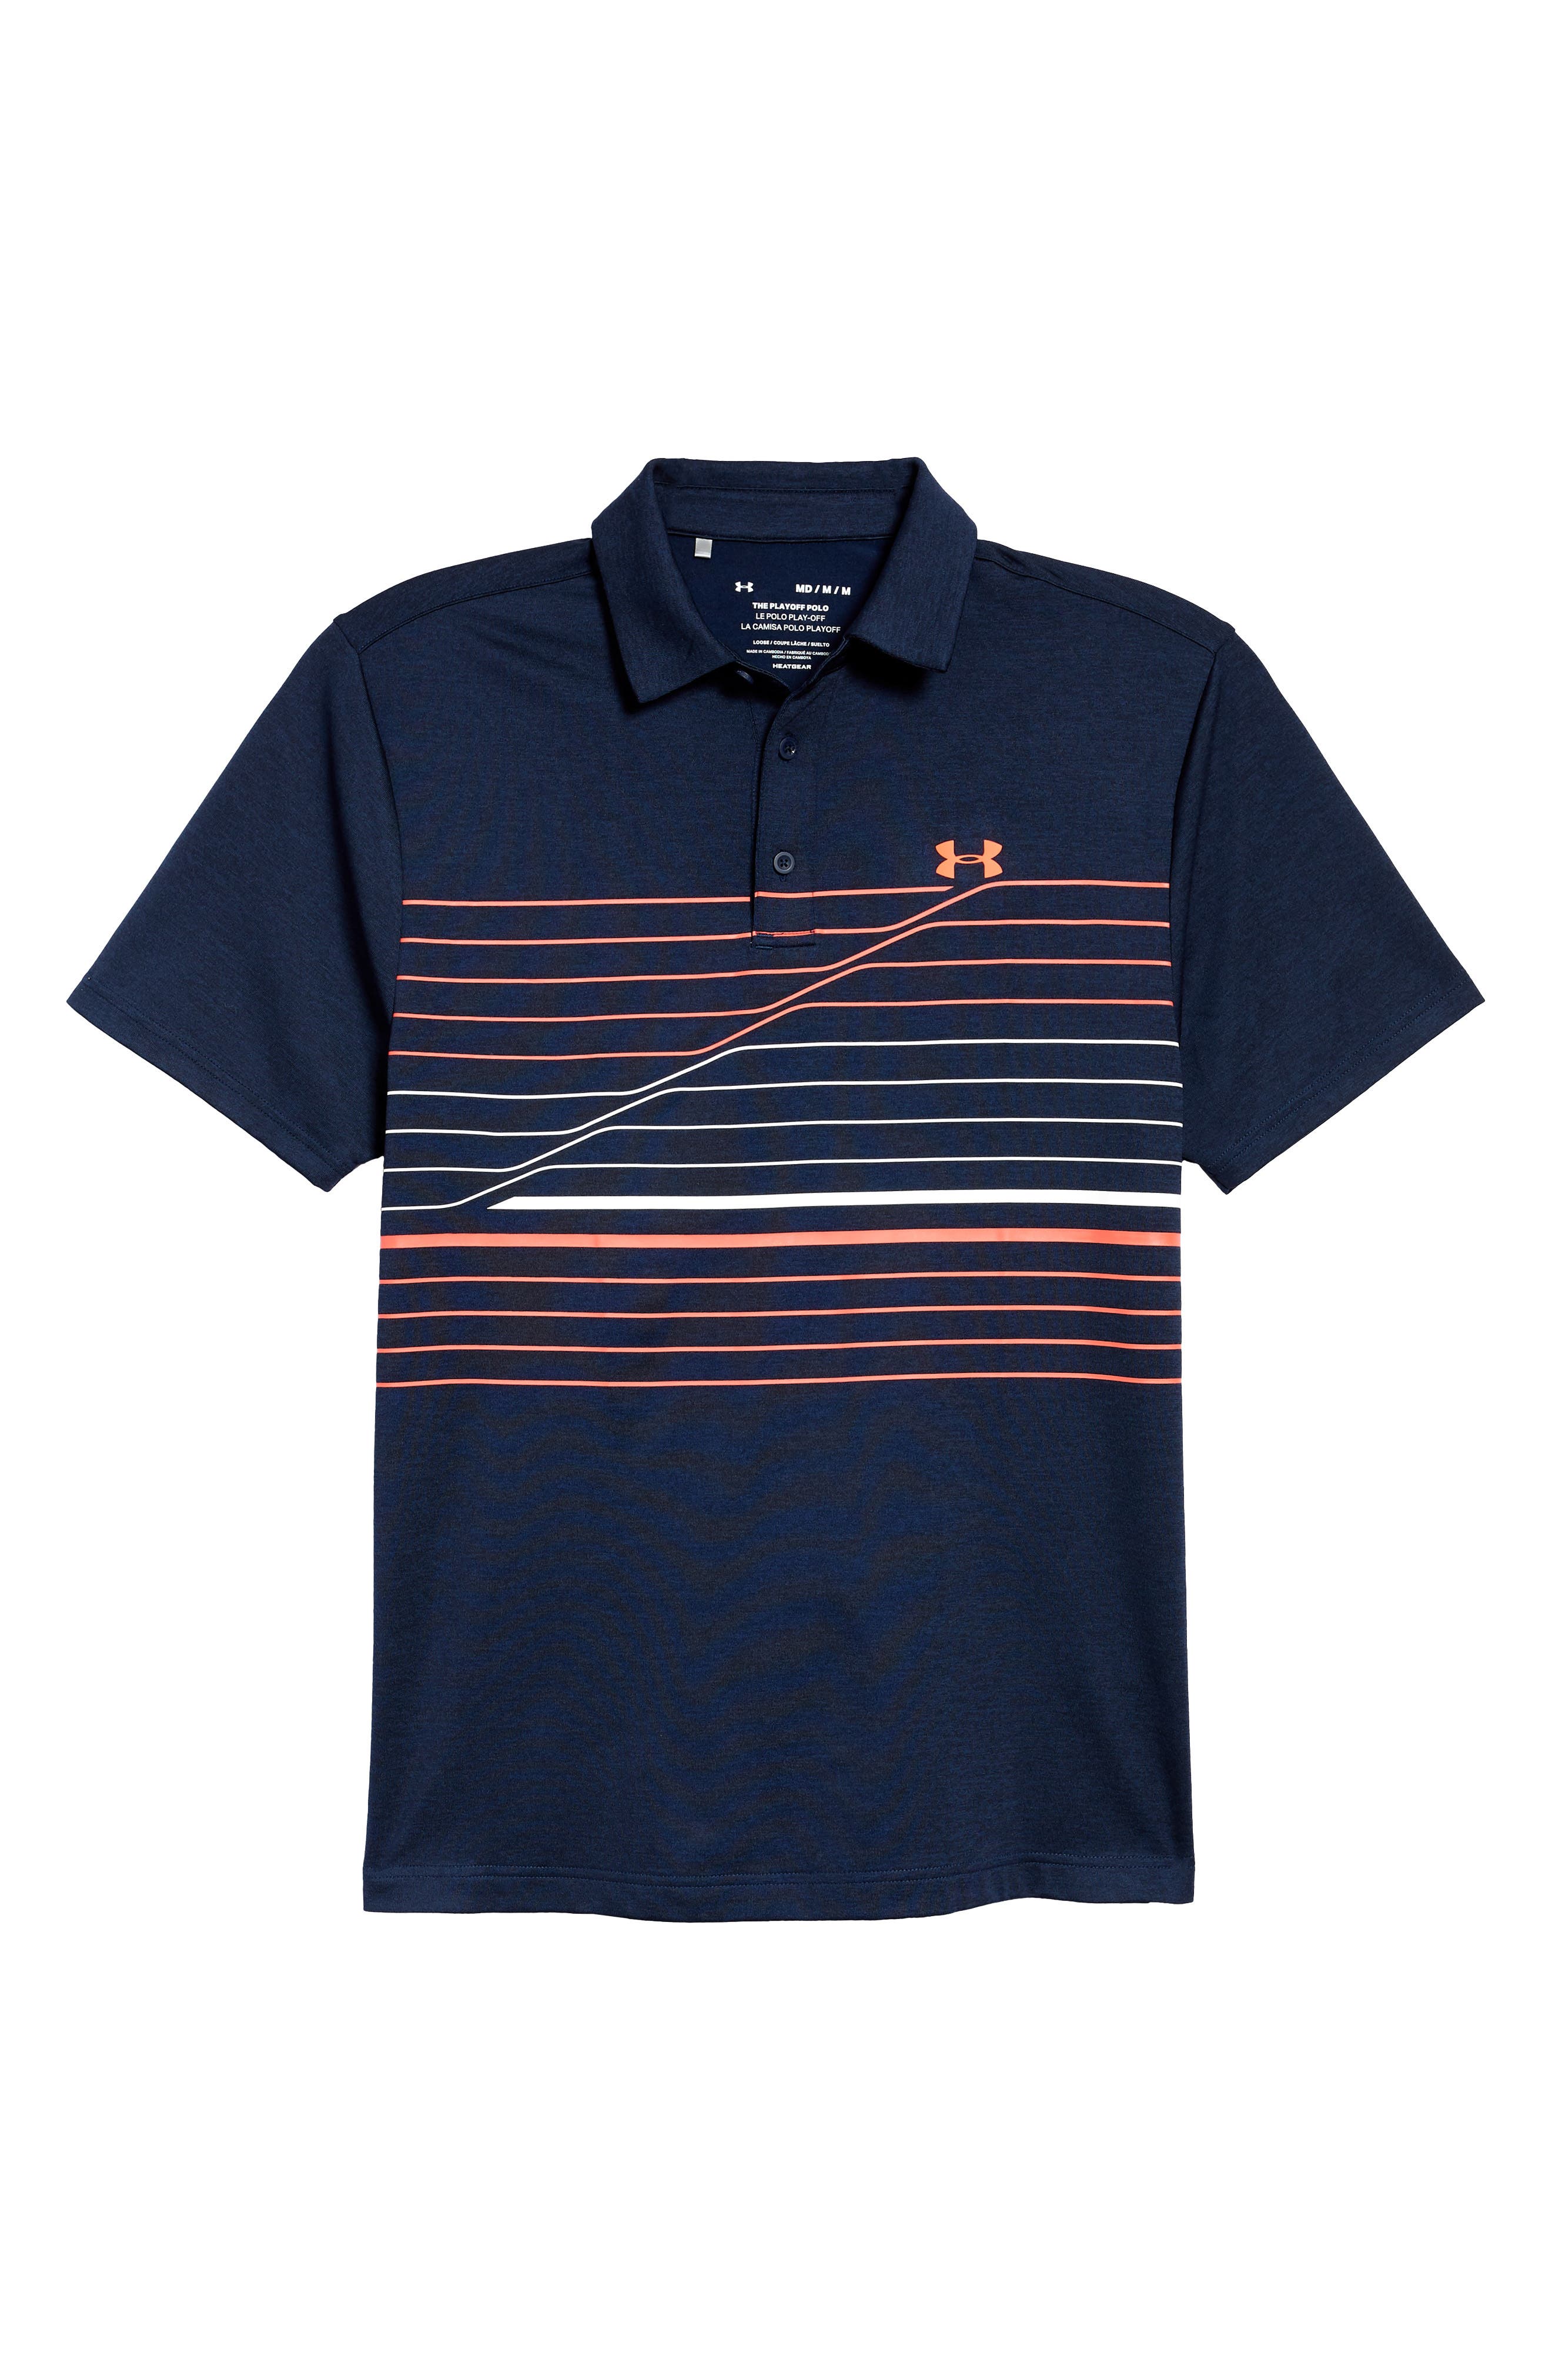 under armour big & tall polo shirts